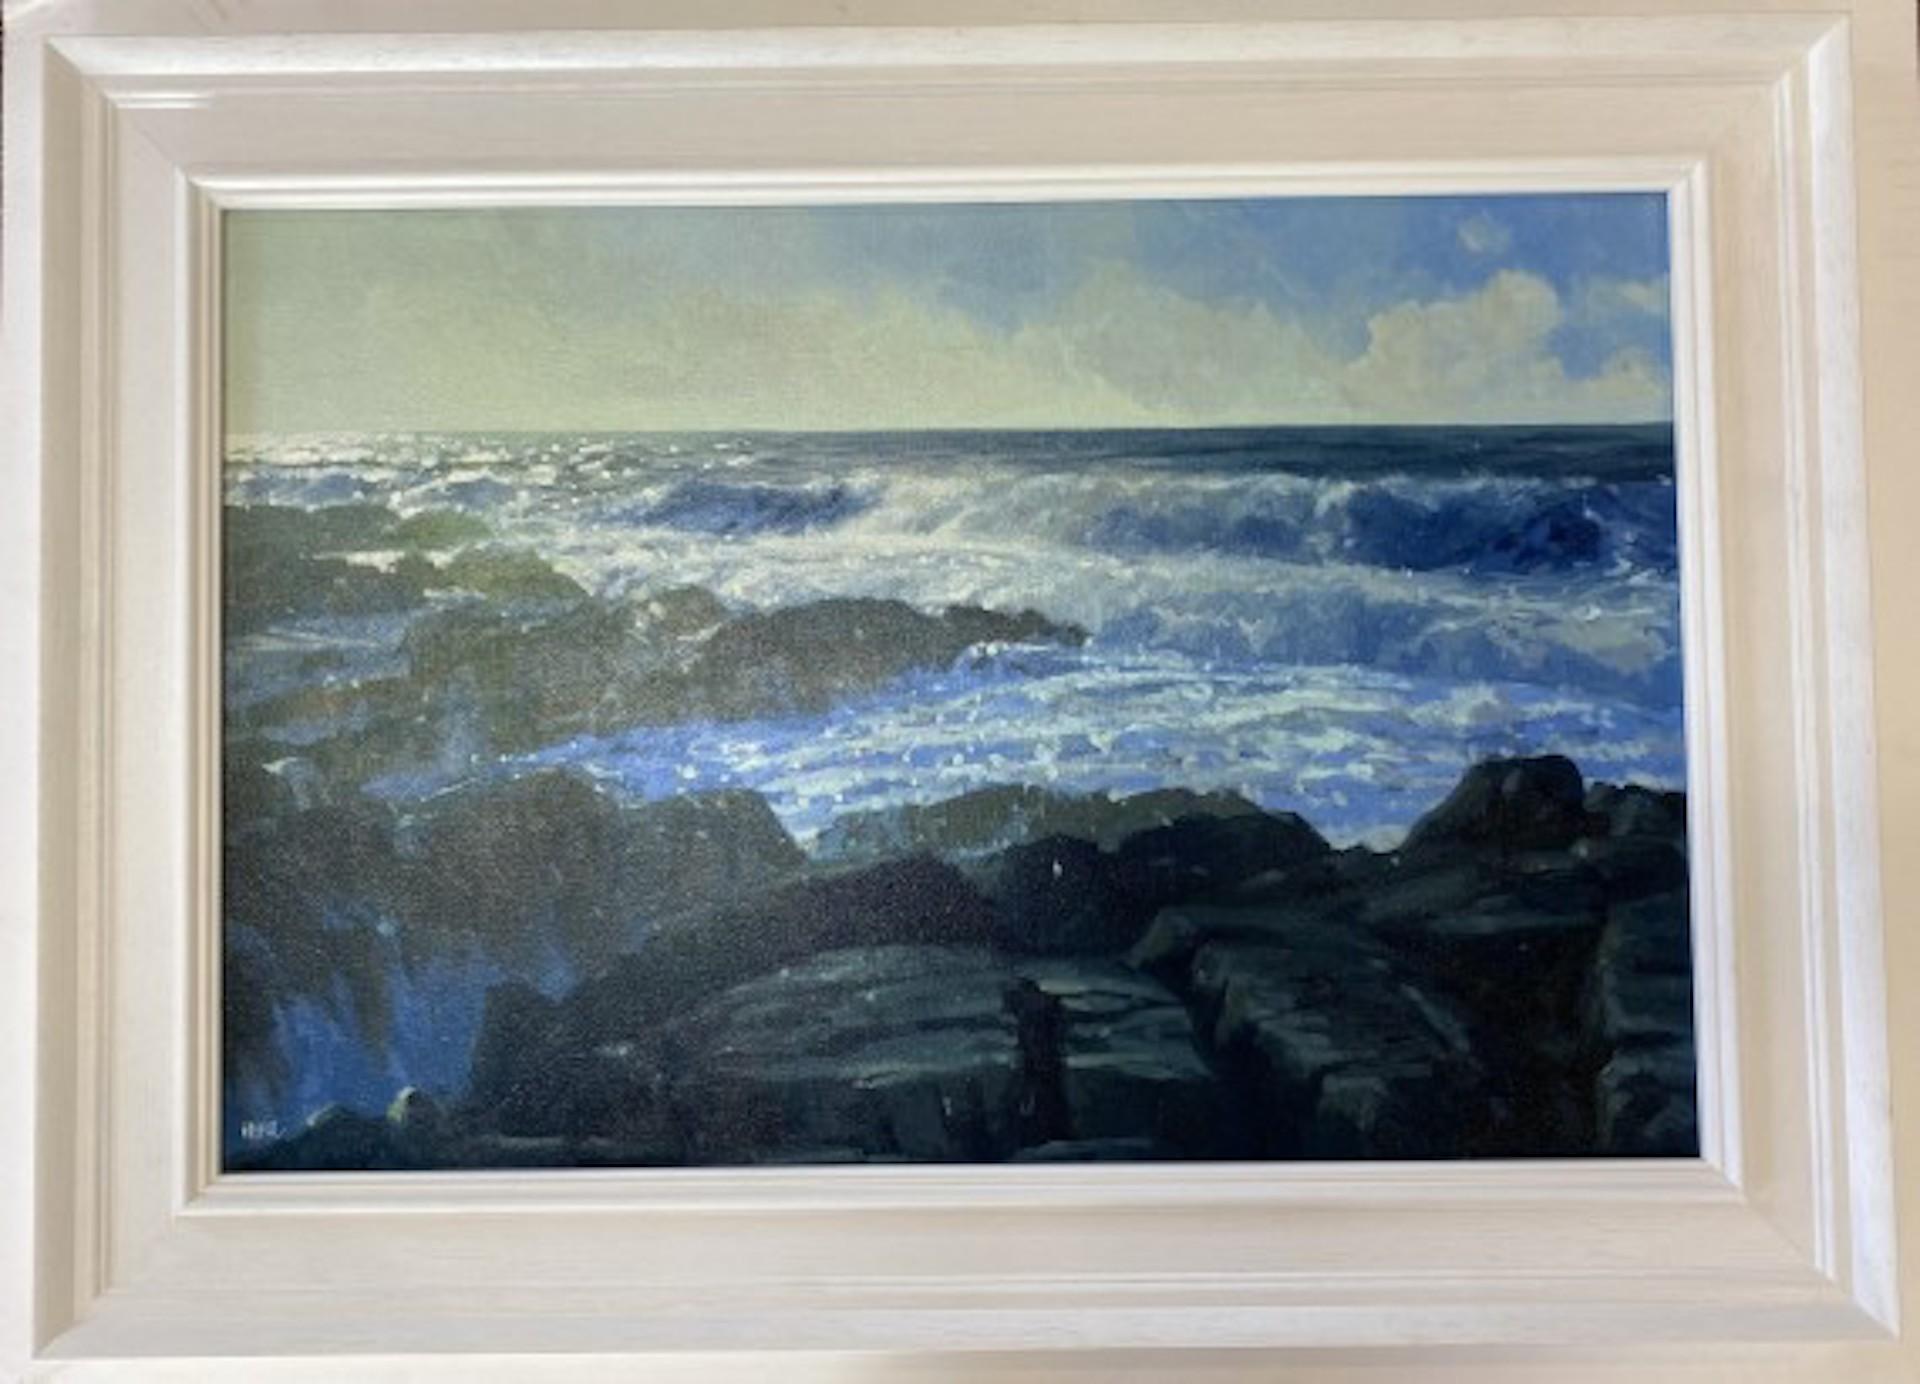 December Storms, Anglesey [2020]
Original
Seascapes
oil on canvas
Complete Size of Unframed Work: H:50 cm x W:76 cm x D:2cmcm
Frame Size: H:66 cm x W:92 cm x D:4cm
Sold FramedPlease note that insitu images are purely an indication of how a piece may